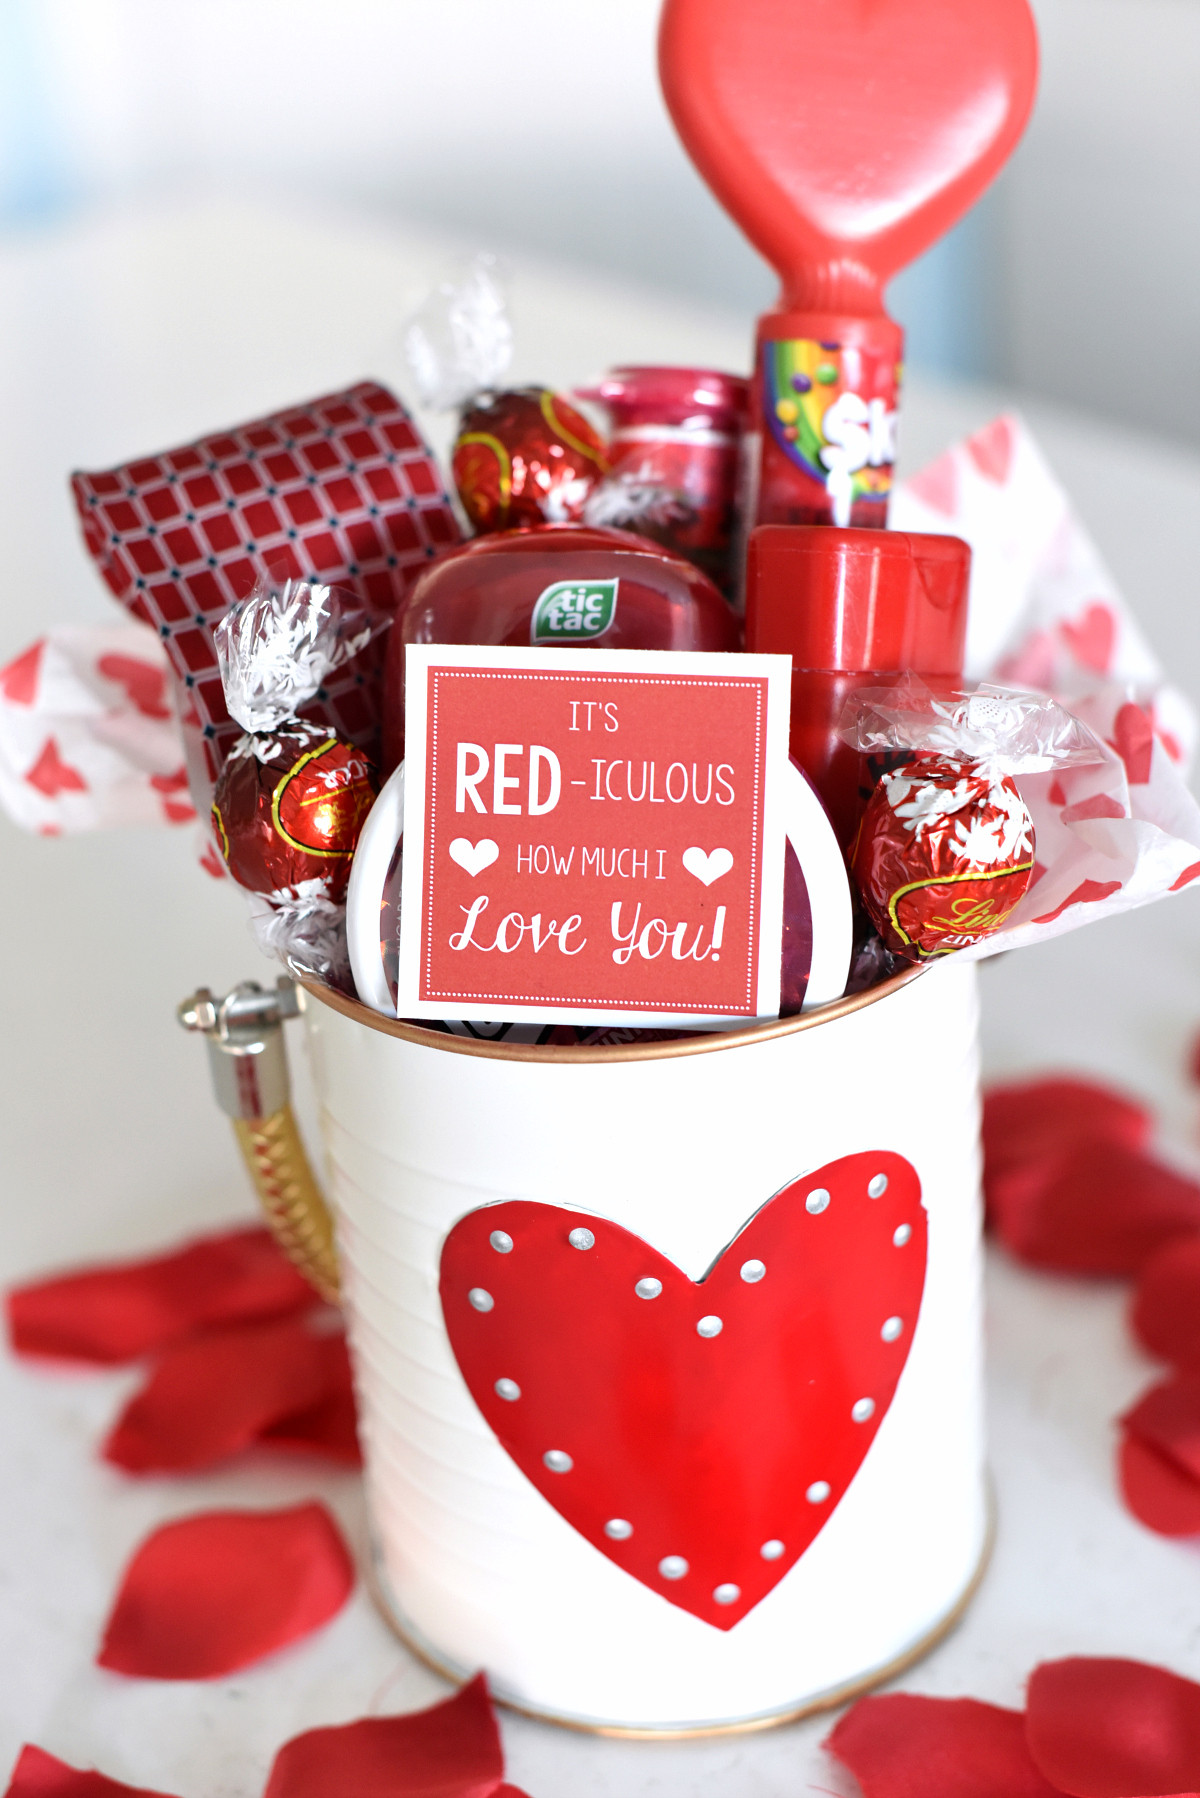 Home Made Gift Ideas For Valentines Day
 25 DIY Valentine s Day Gift Ideas Teens Will Love